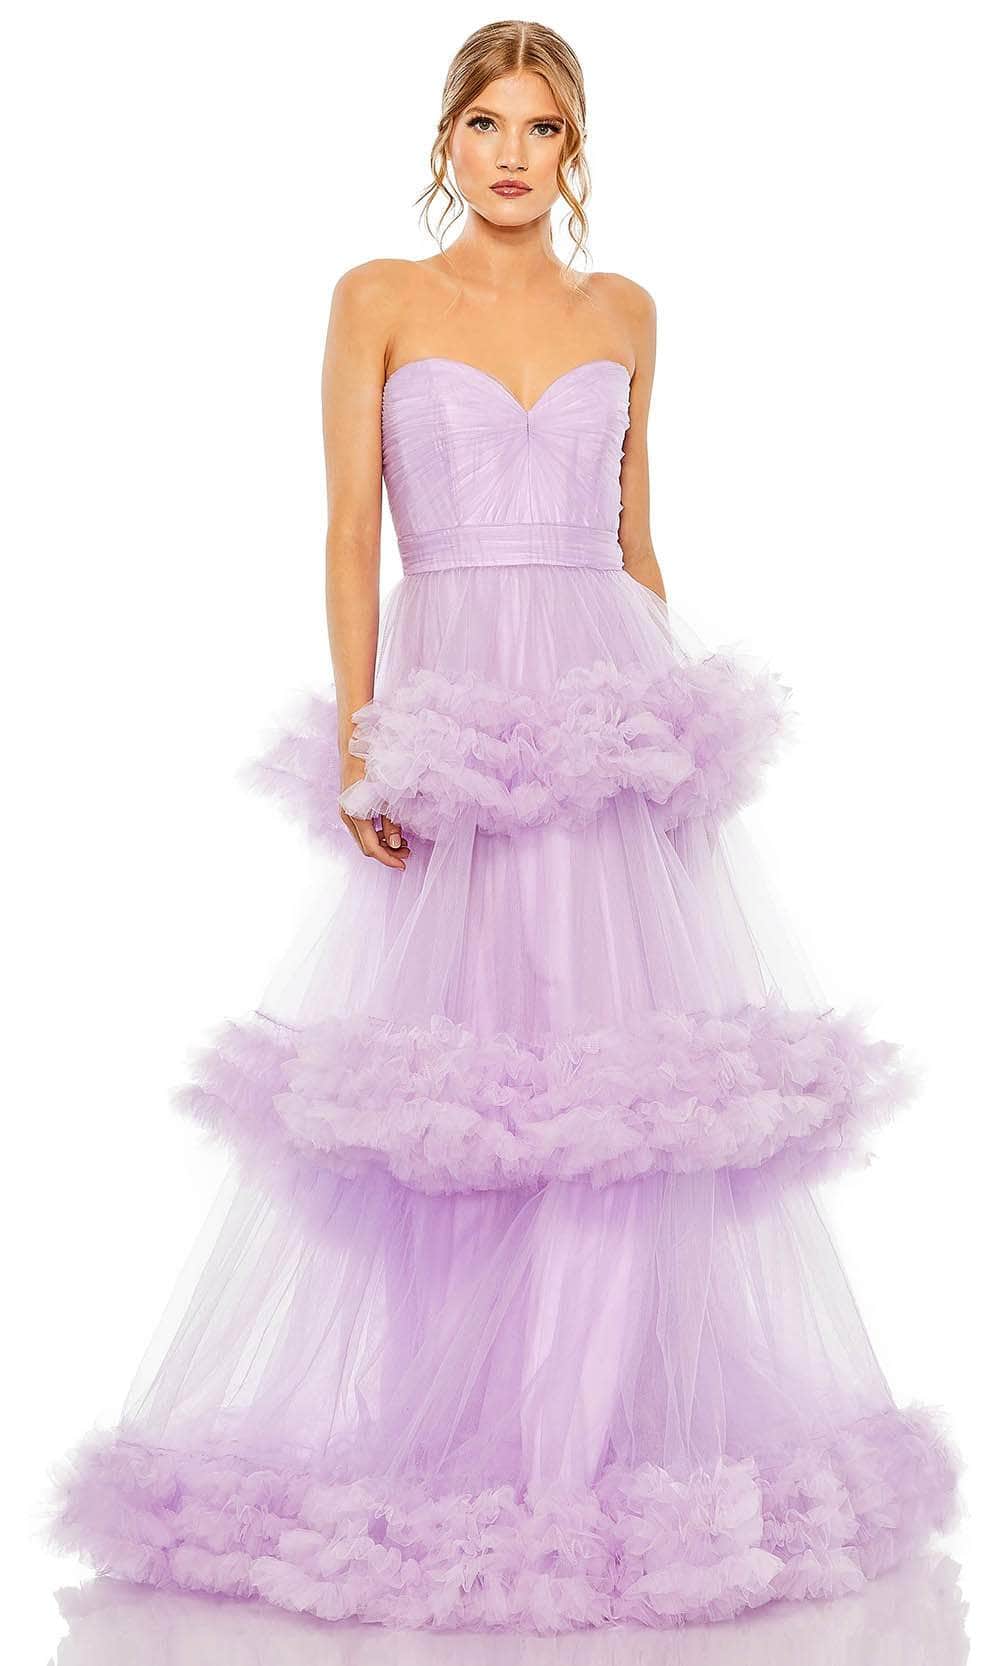 Image of Mac Duggal 68490 - Ruffle Tulle Tiered Strapless Ballgown